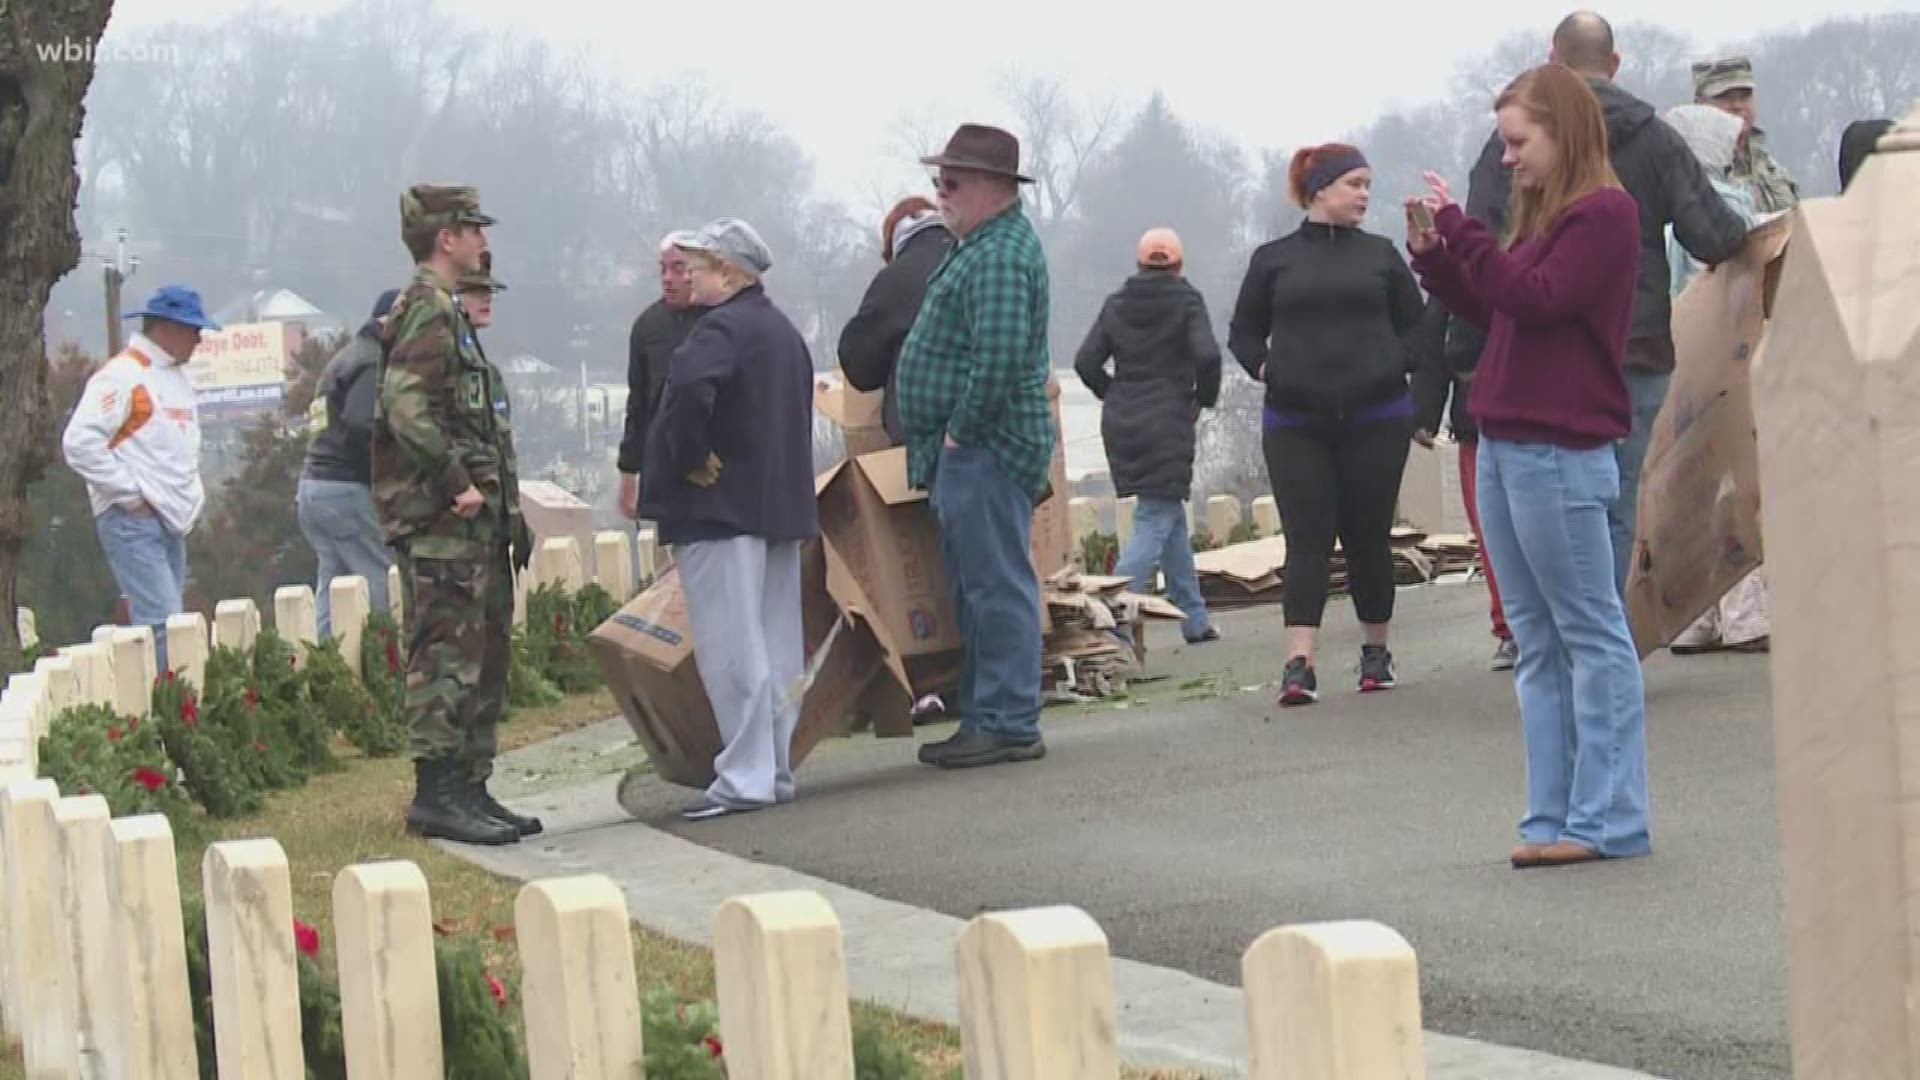 East Tennesseans are joining thousands of people across the nation in laying wreaths on the graves of fallen soldiers.